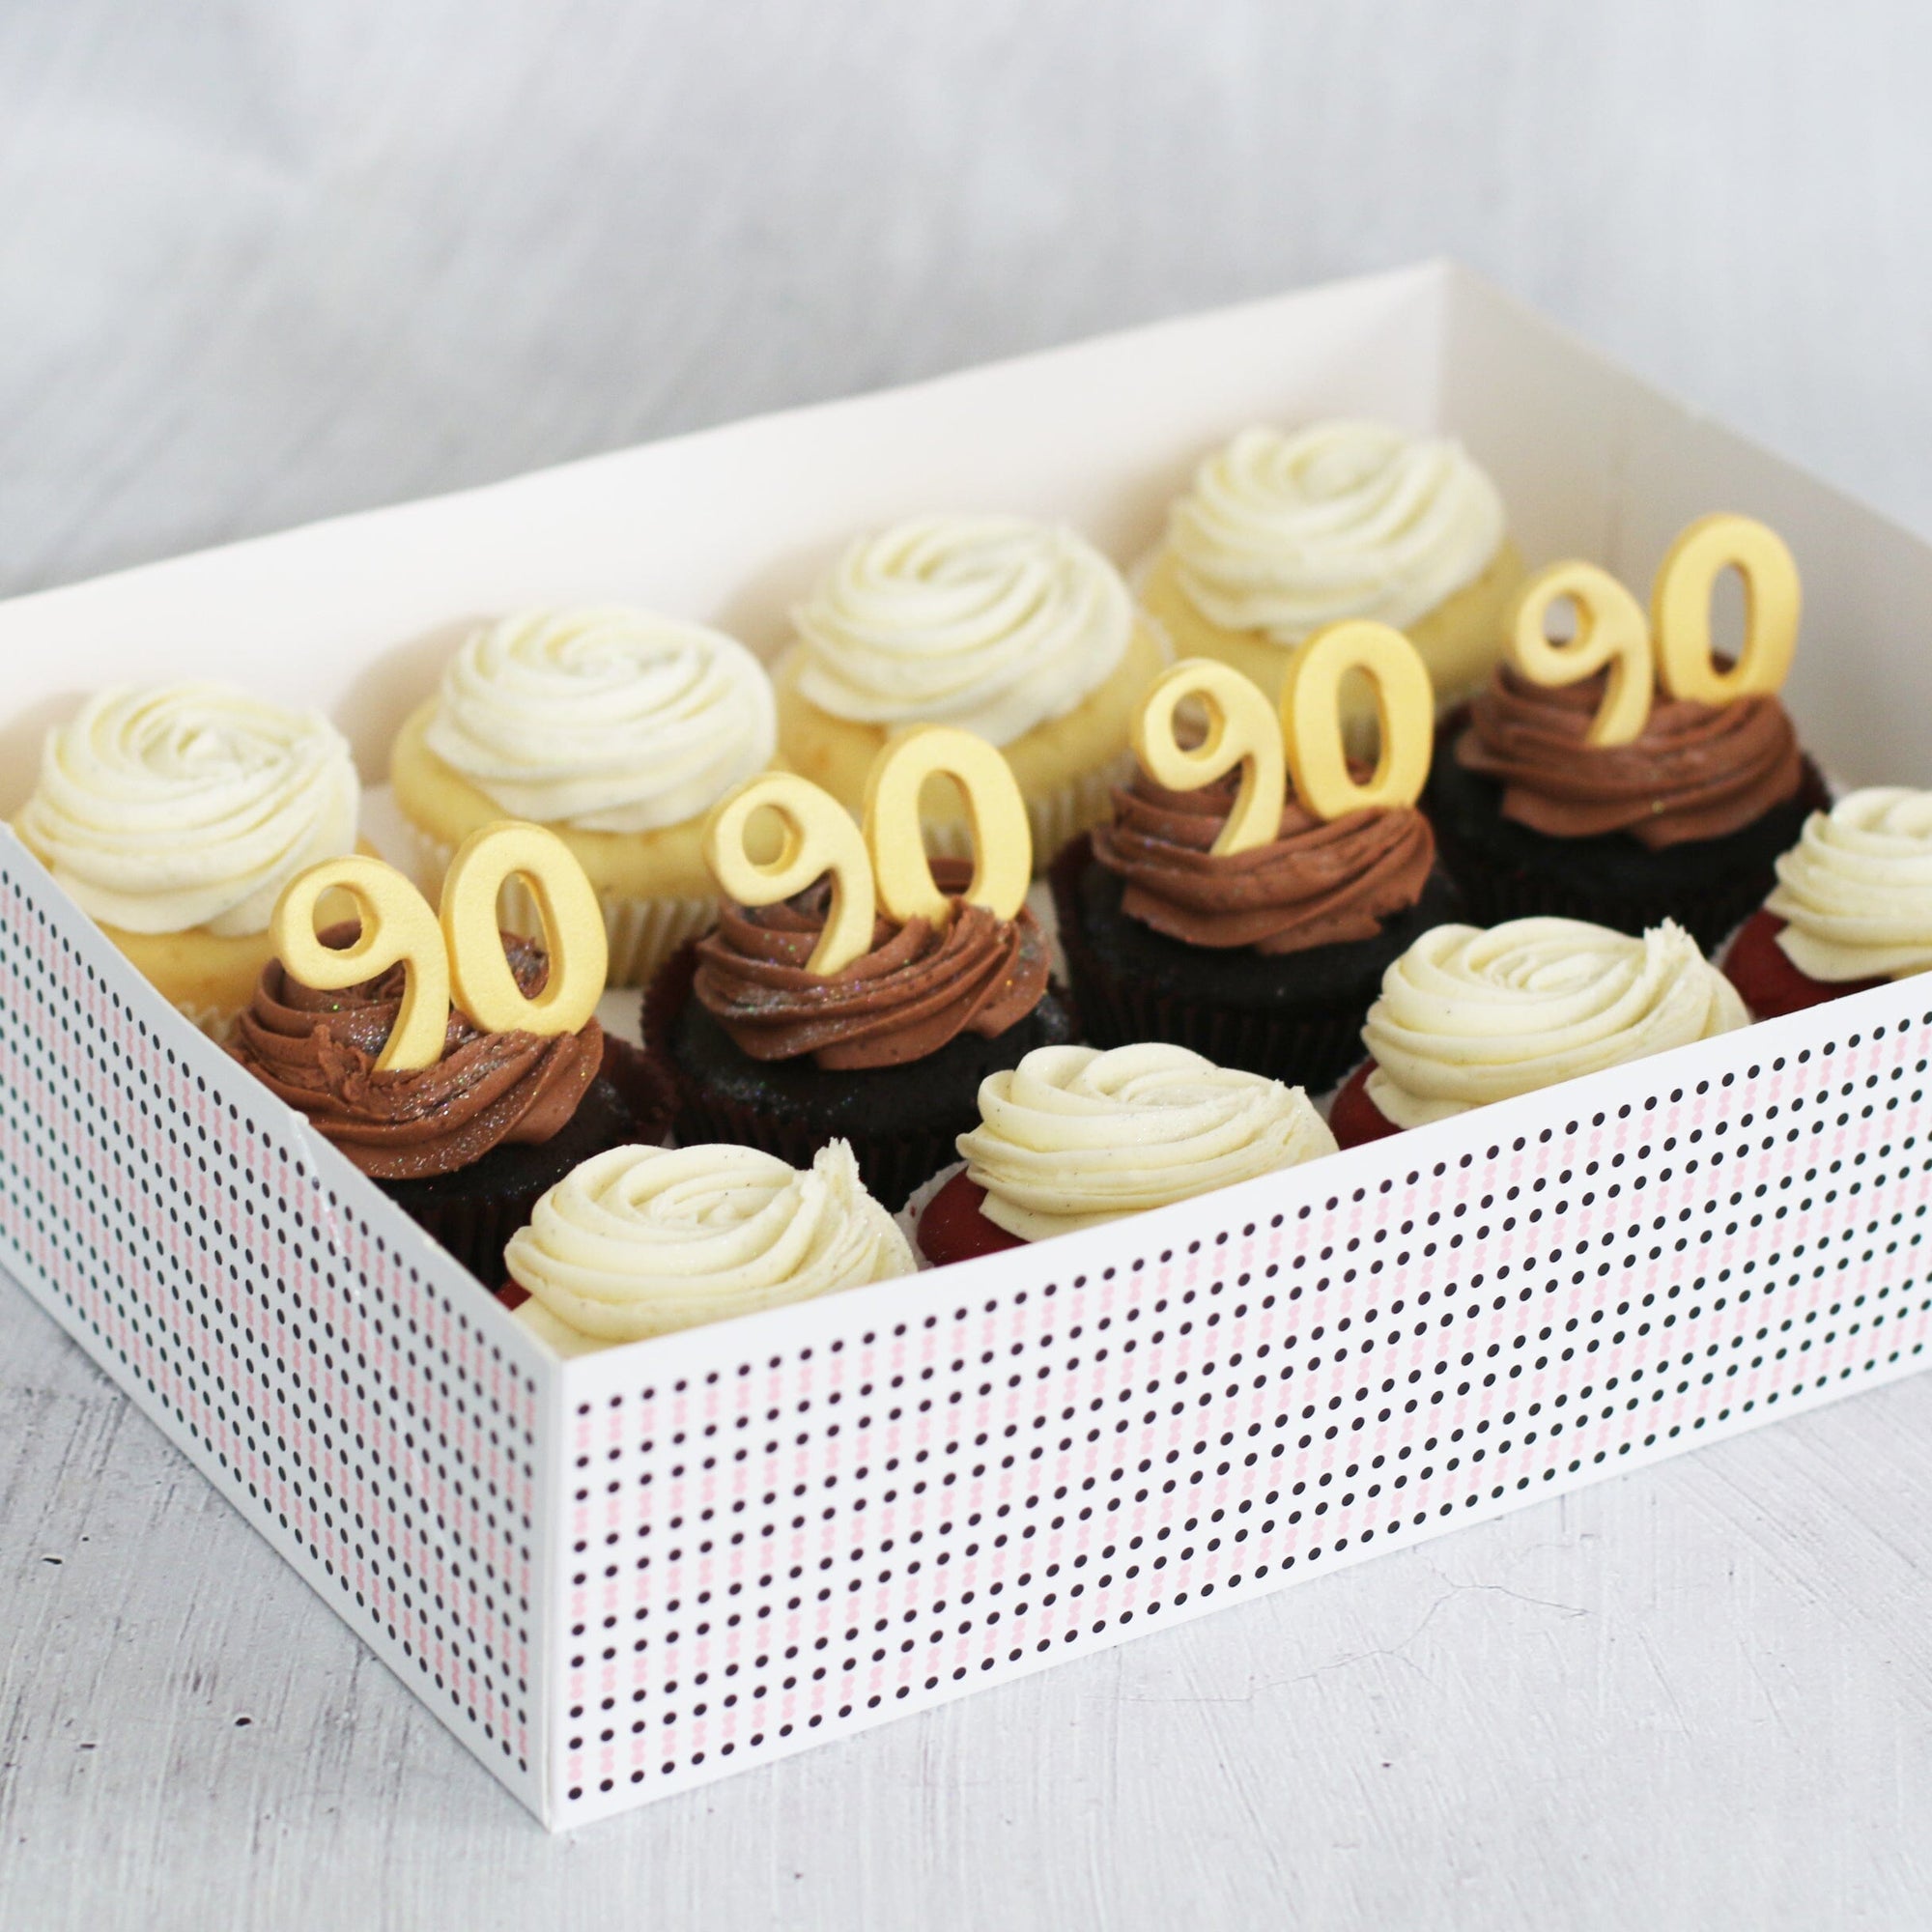 90th Birthday Cupcakes in GOLD Cupcakes The Cupcake Queens 